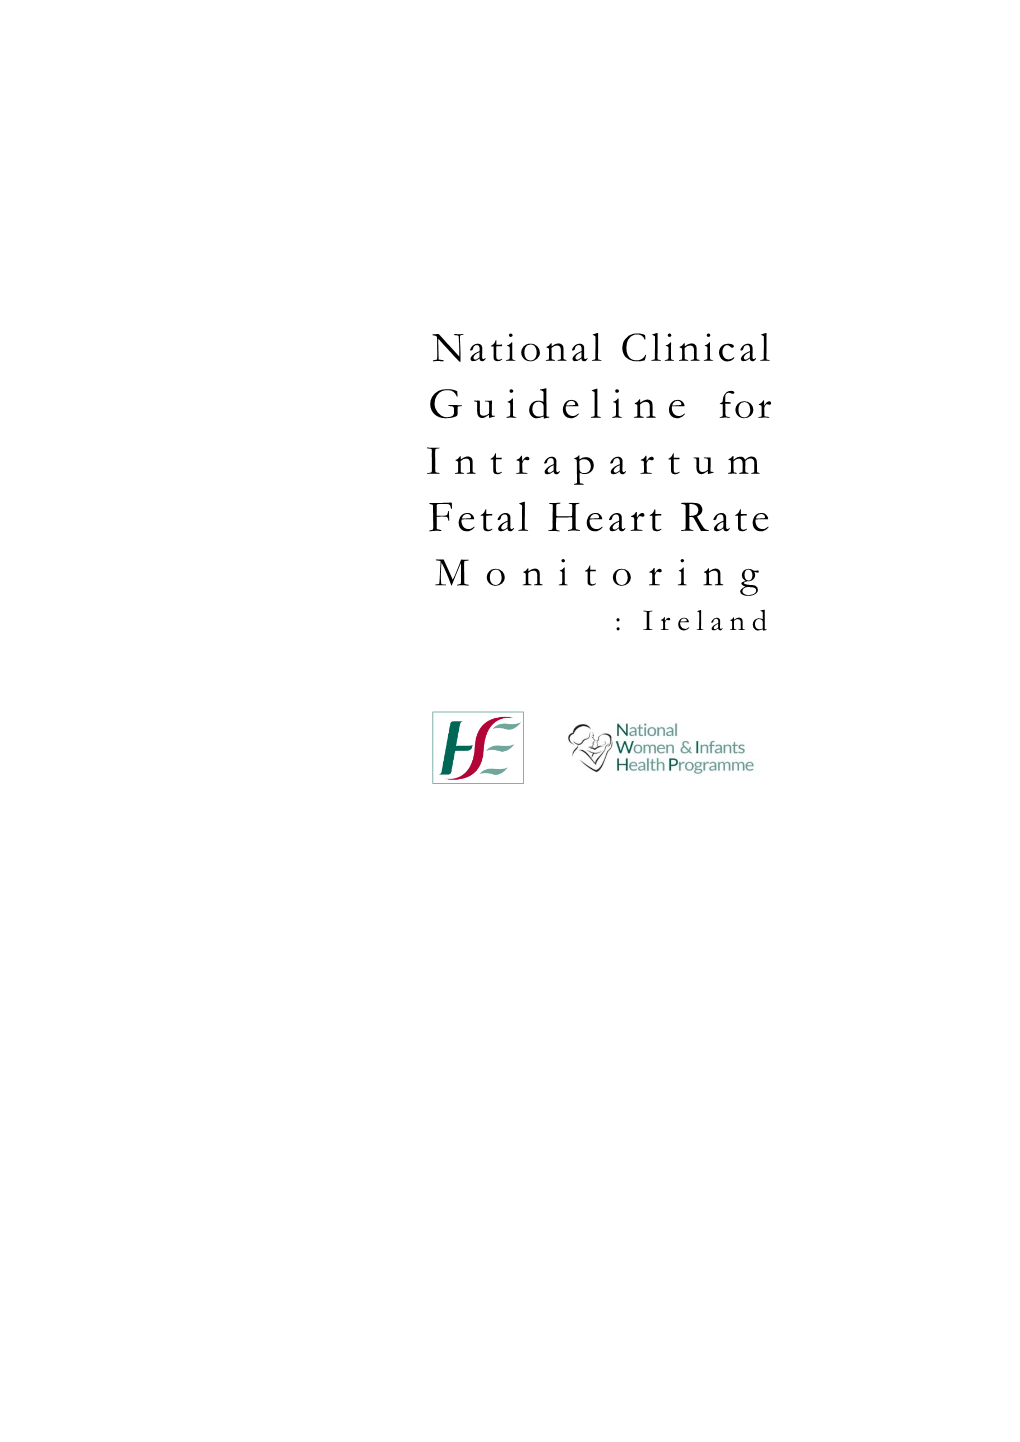 Guideline for Fetal Heart Rate Monitoring: Ireland